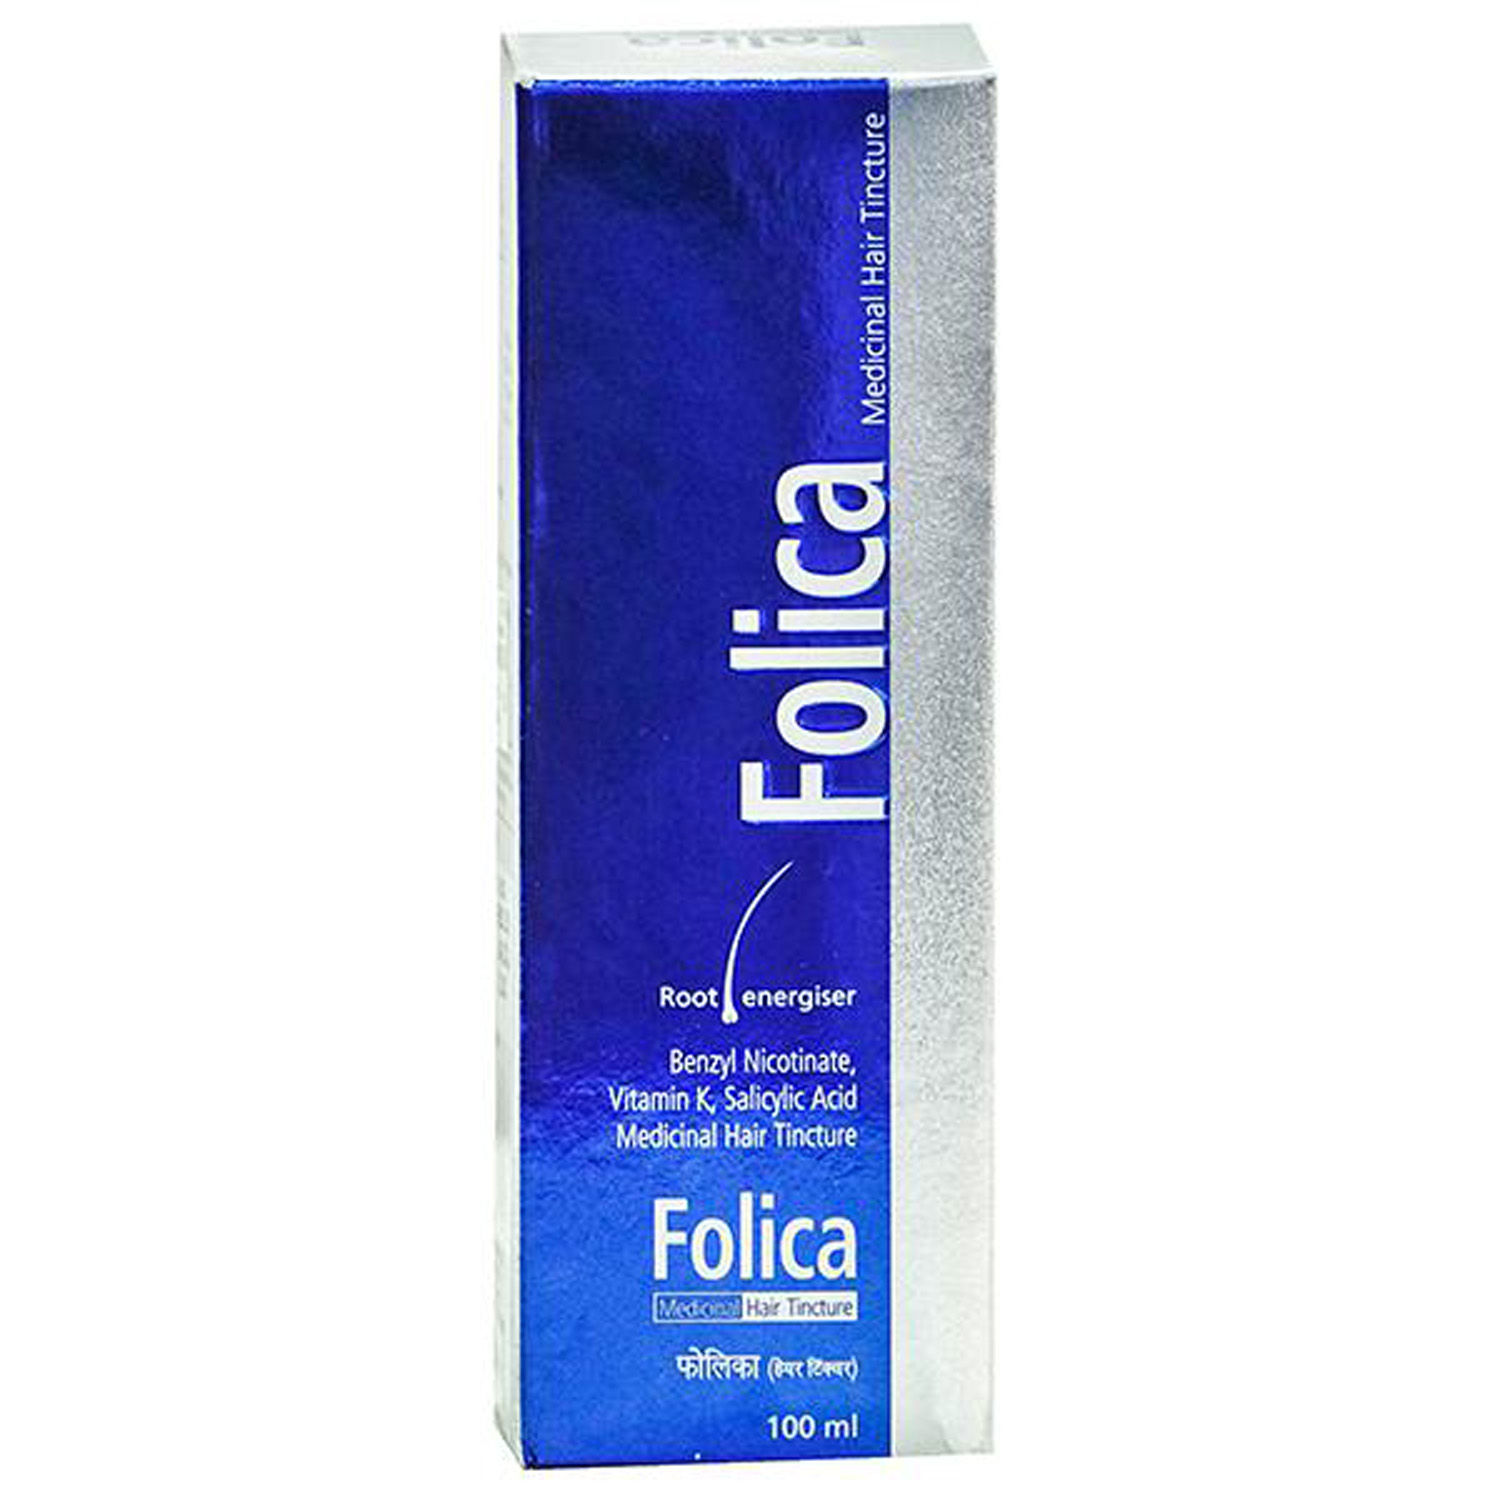 Folica Medicinal Hair Tincture 100 ml Price Uses Side Effects  Composition  Apollo Pharmacy